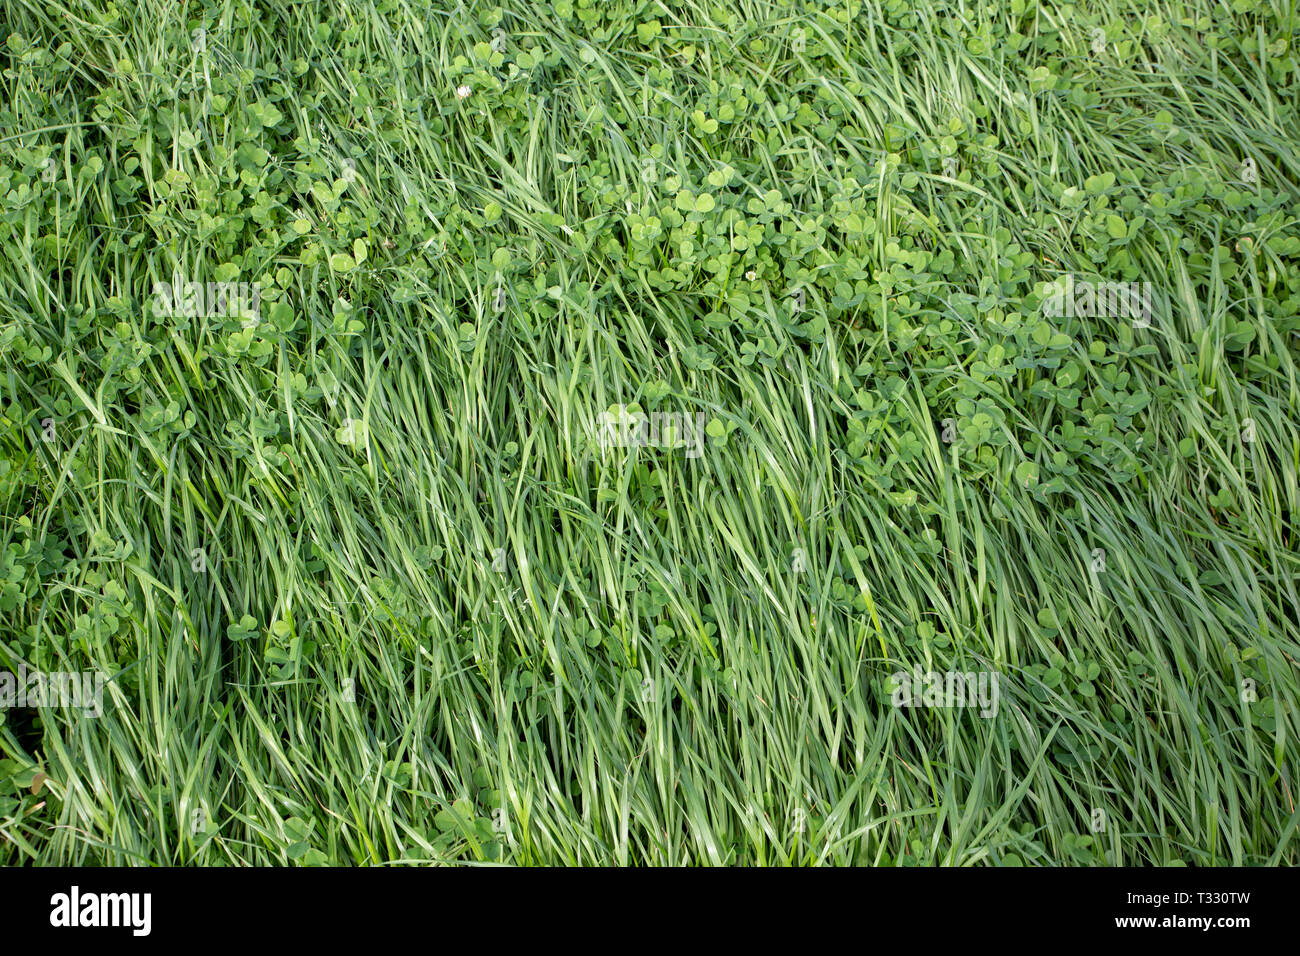 Annual ryegrass and clover grown in a rural field for stock food and hay Stock Photo